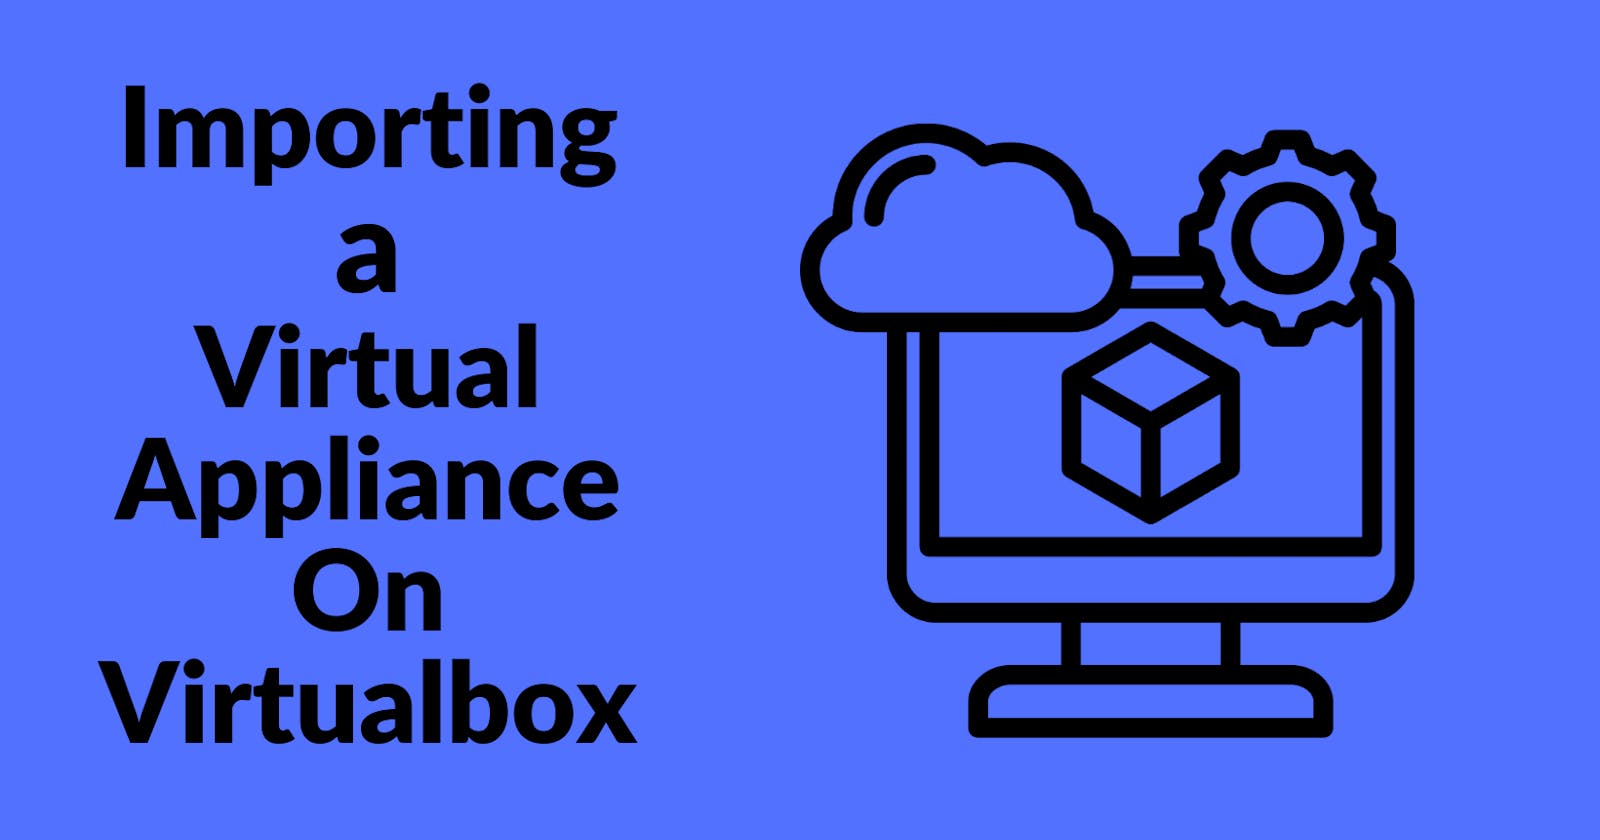 How to Import a Virtual Appliance on VirtualBox.